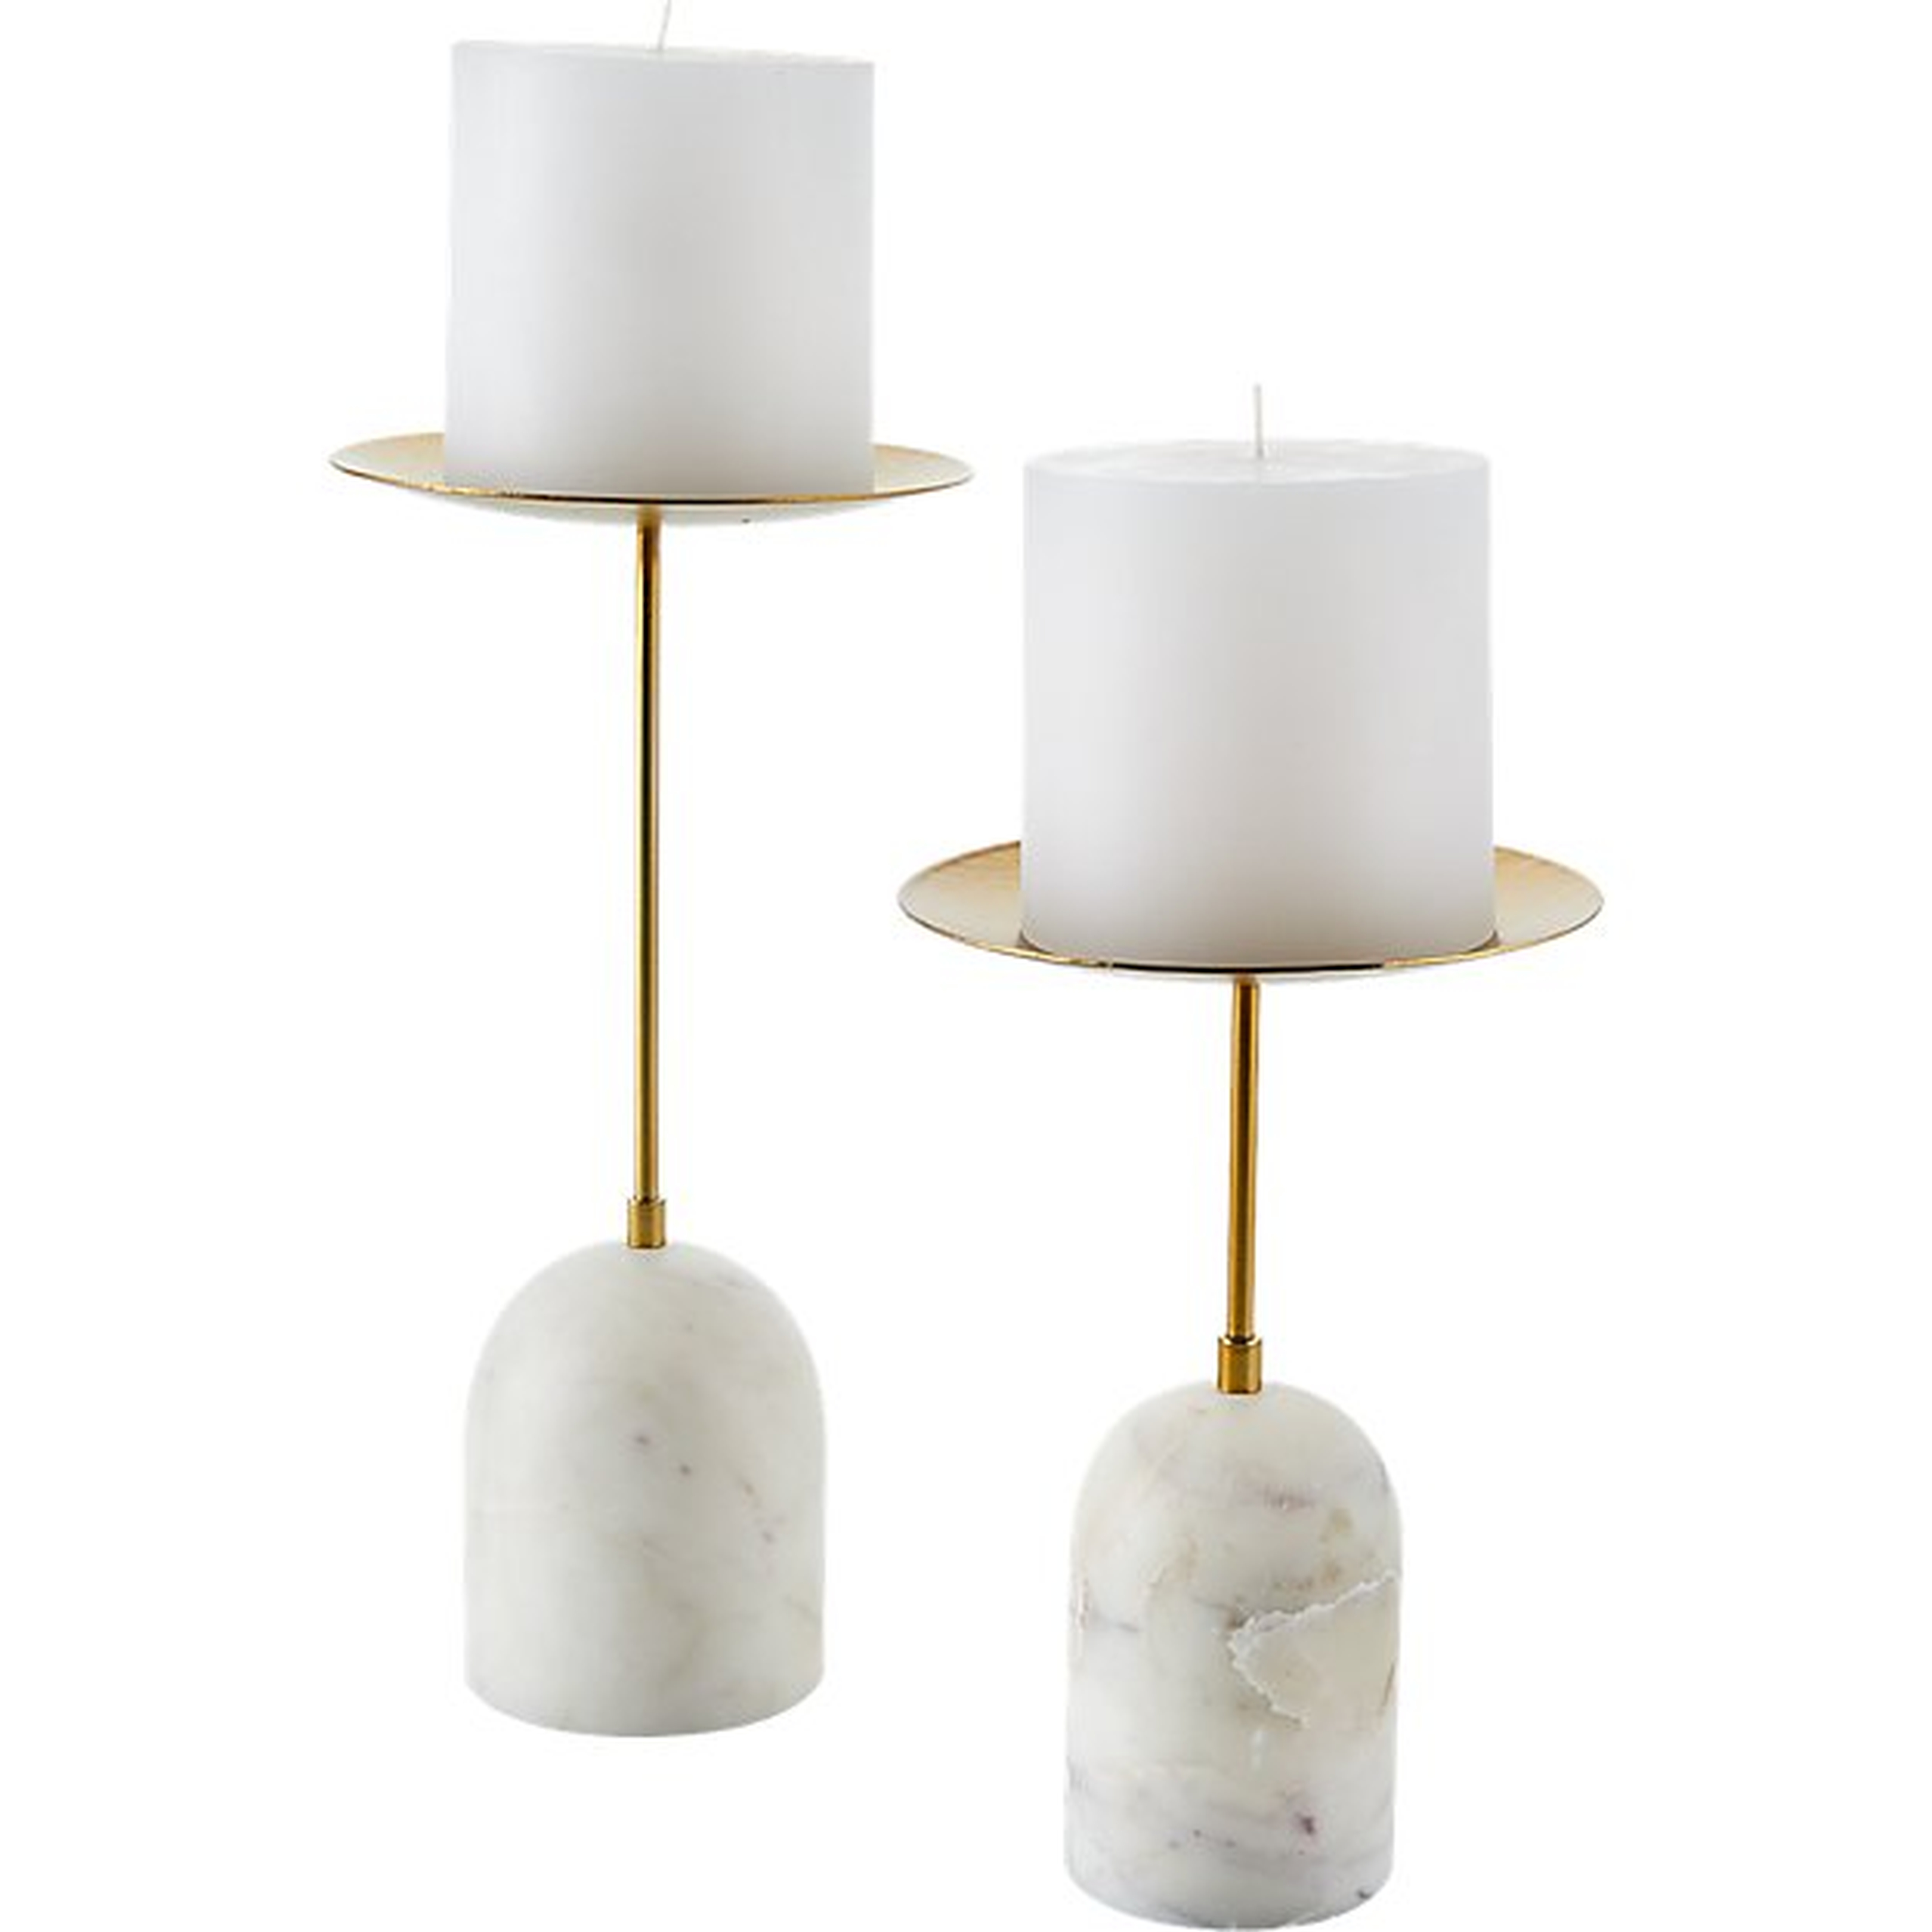 NUMA MARBLE AND BRASS CANDLE STANDS SET OF 2 - CB2